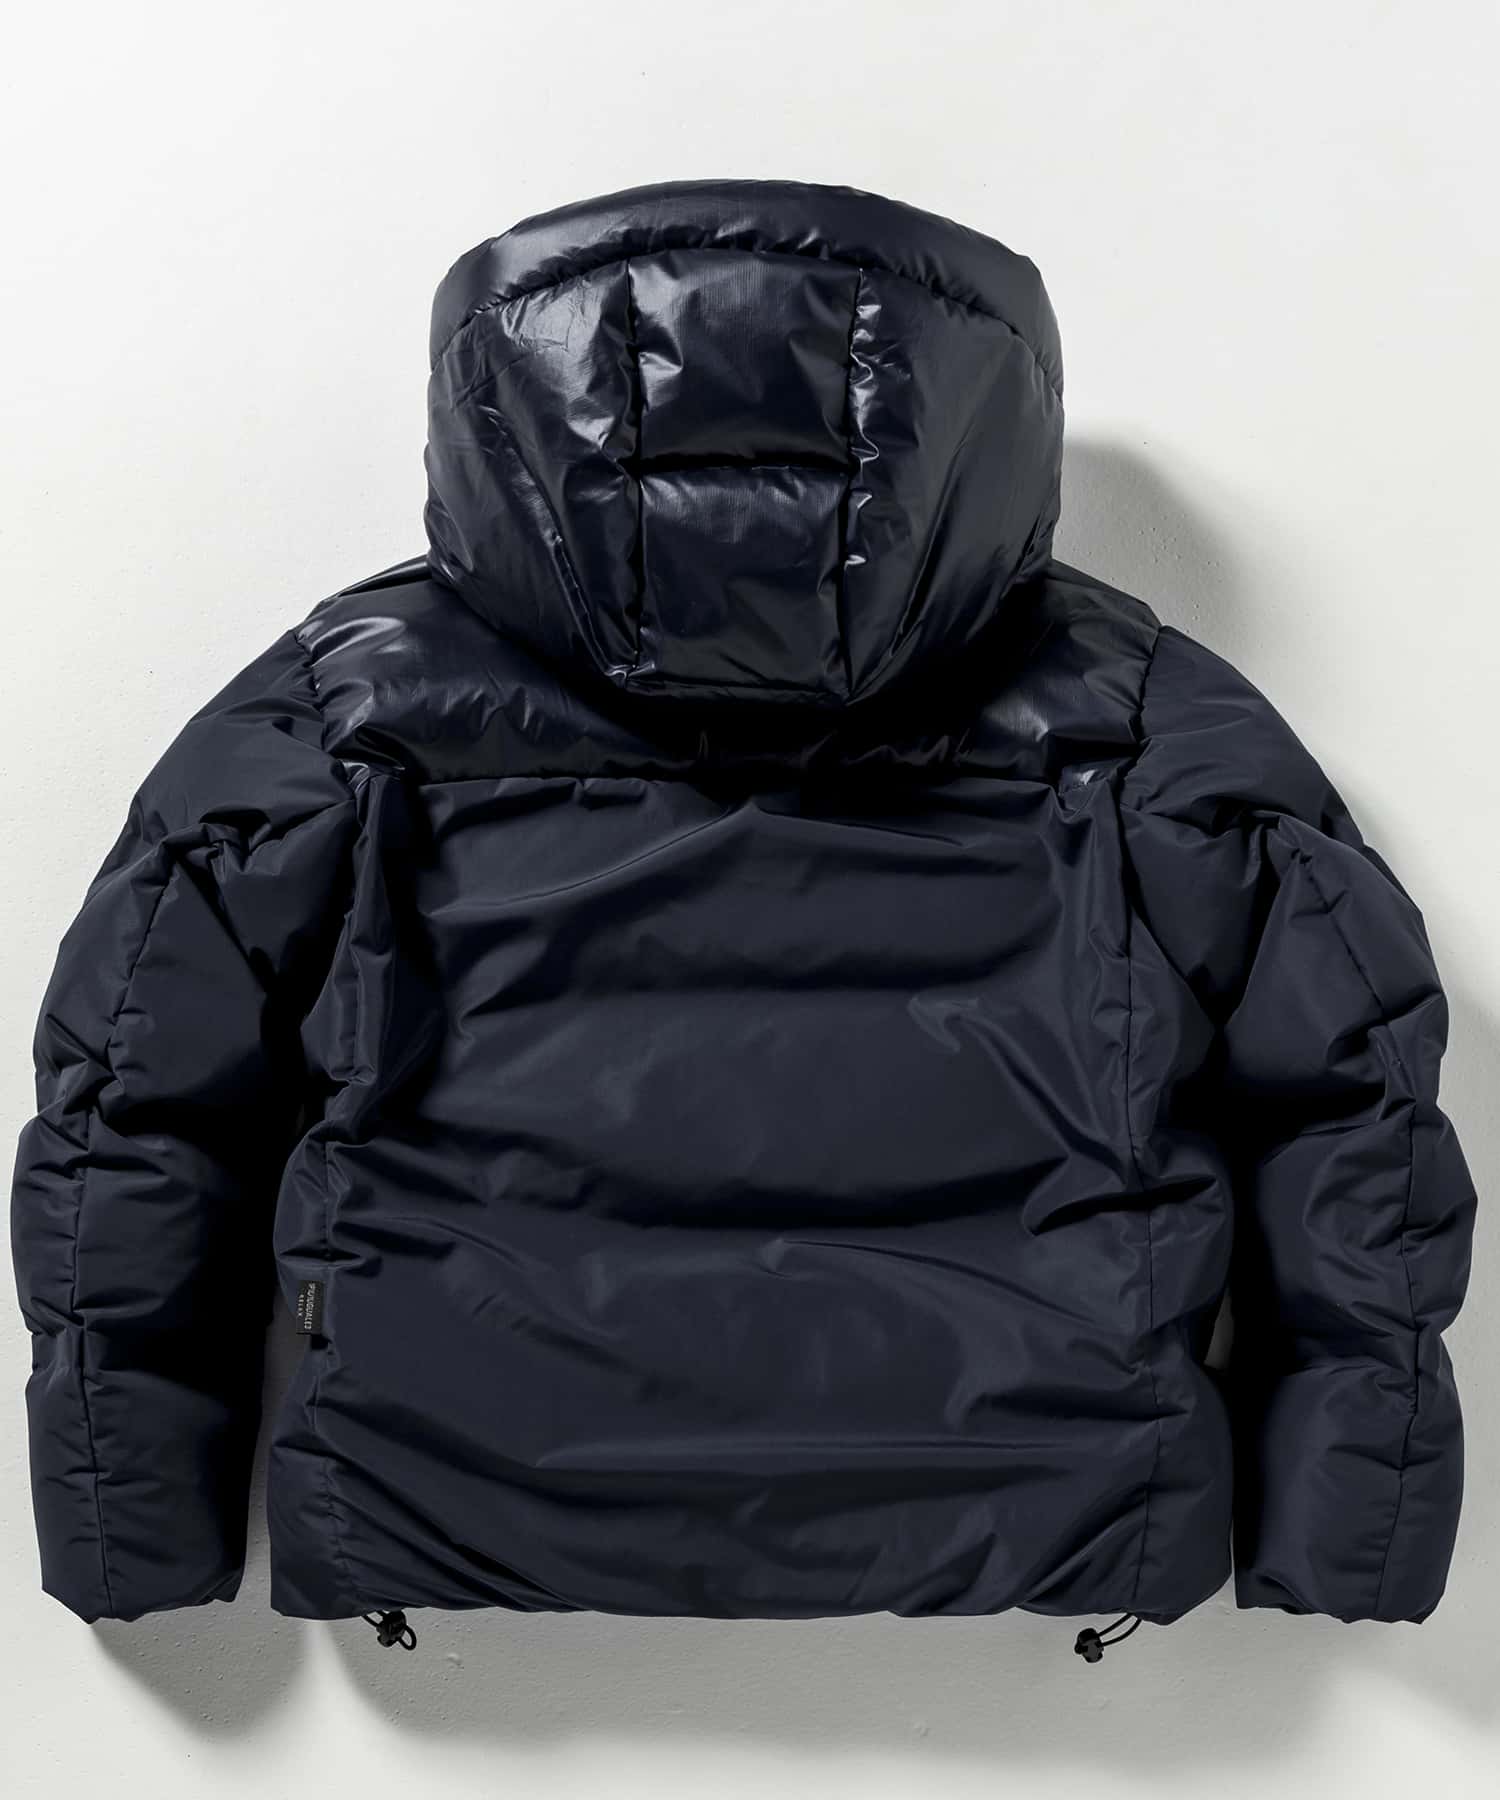 MENS】コンビダウンジャケット WINDSTOPPER(R) プロダクト by GORE-TEX 